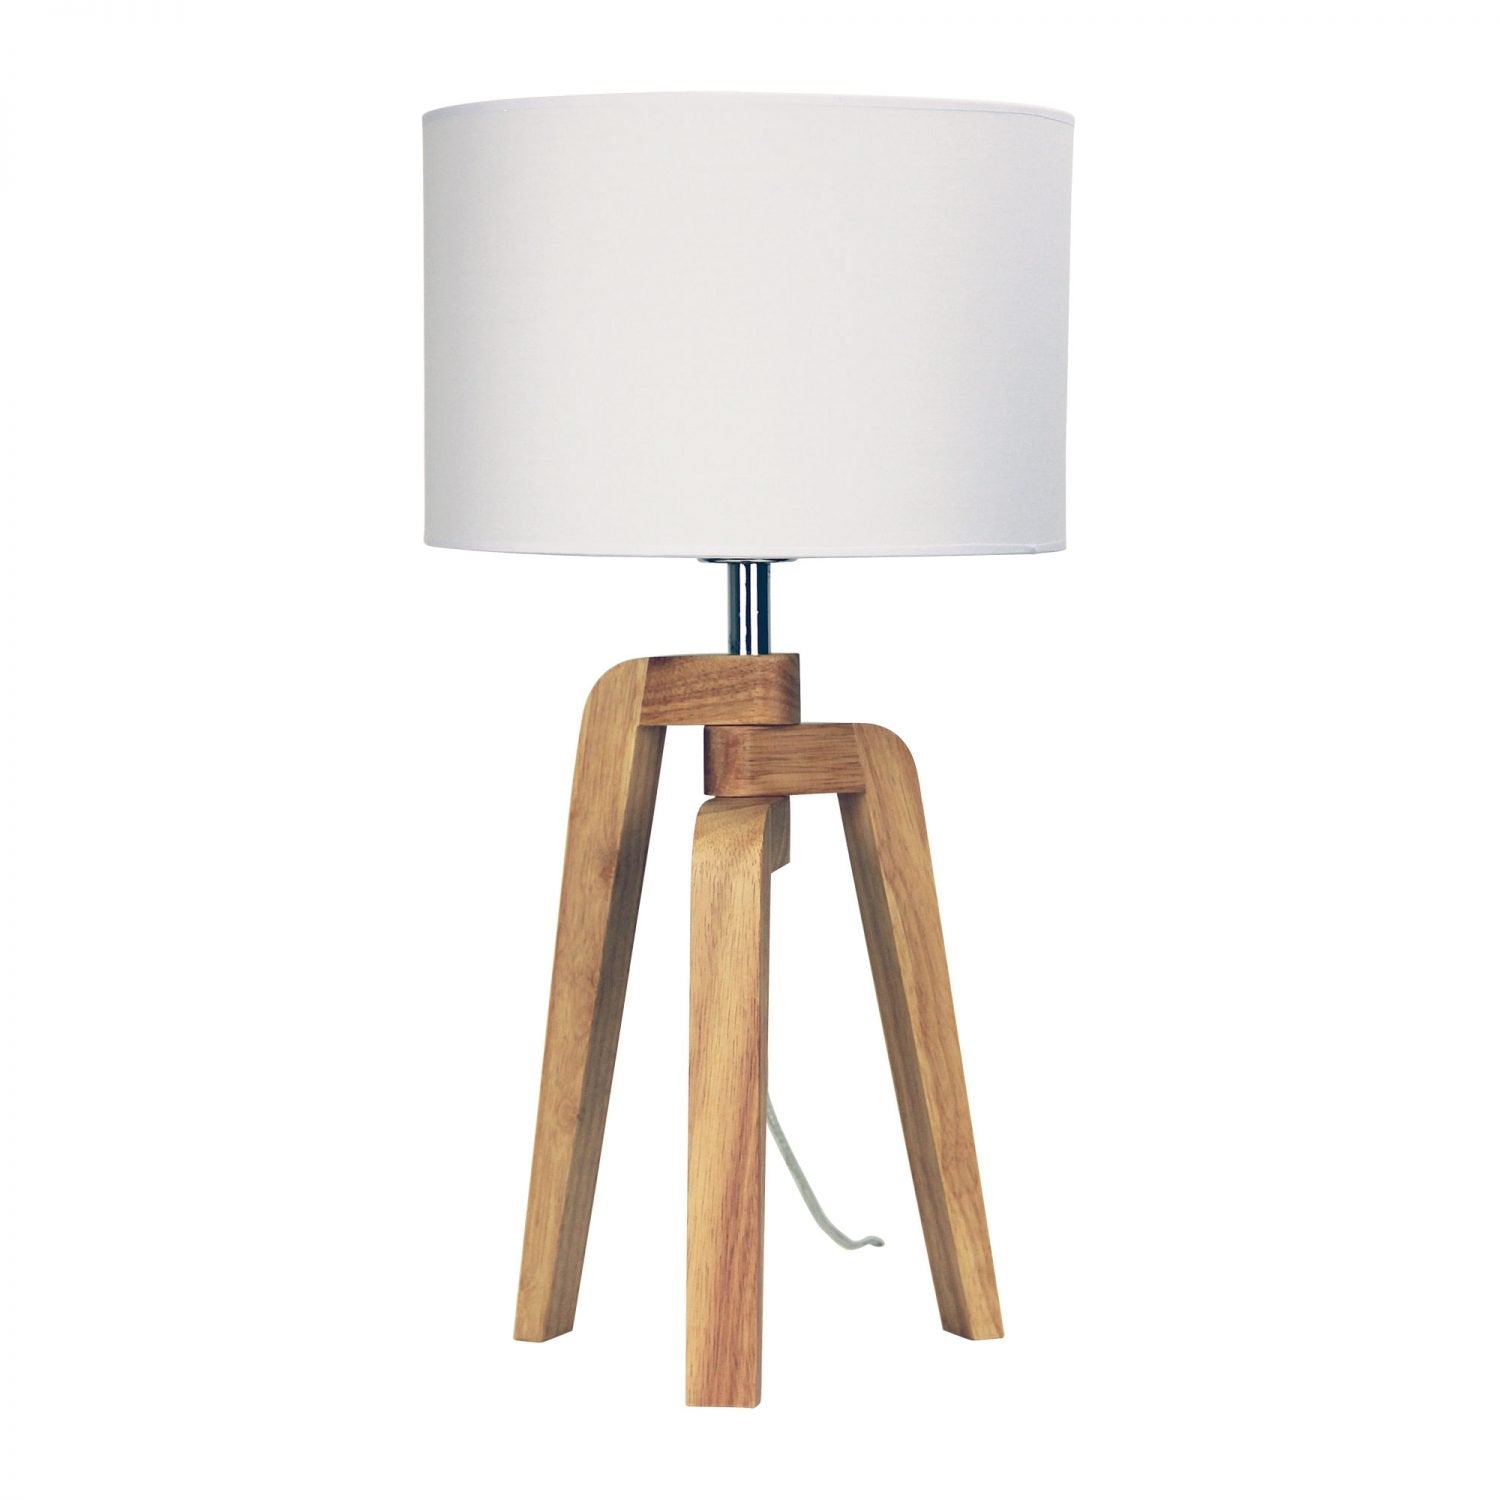 Lund 1 Light Timber Table Lamp With White Cotton Shade - OL93521WH